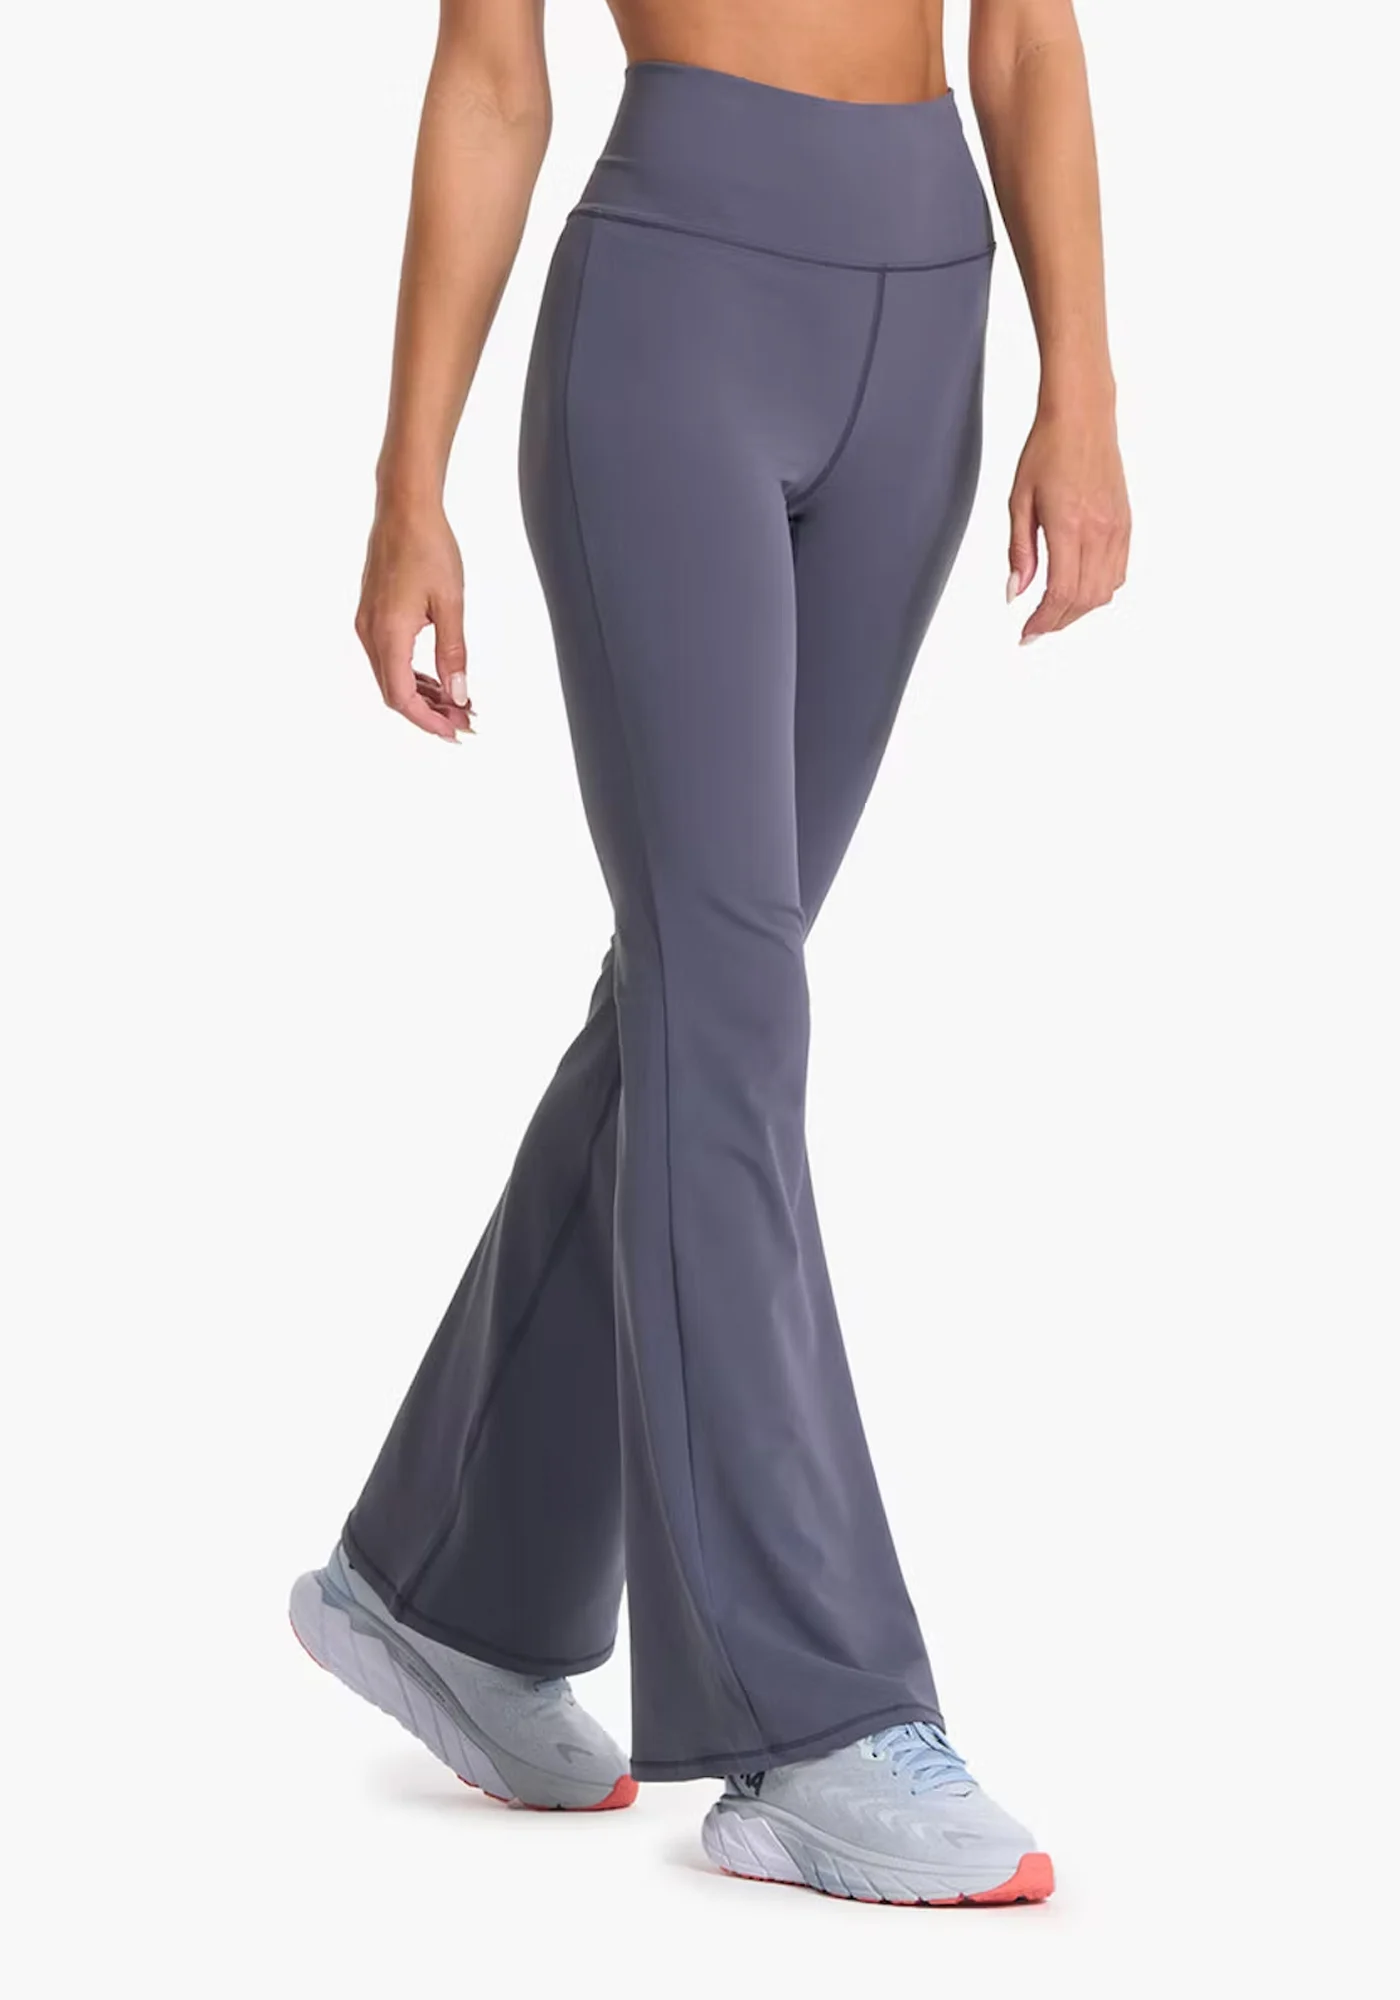 Best Flare Leggings and Pants - Schimiggy Reviews